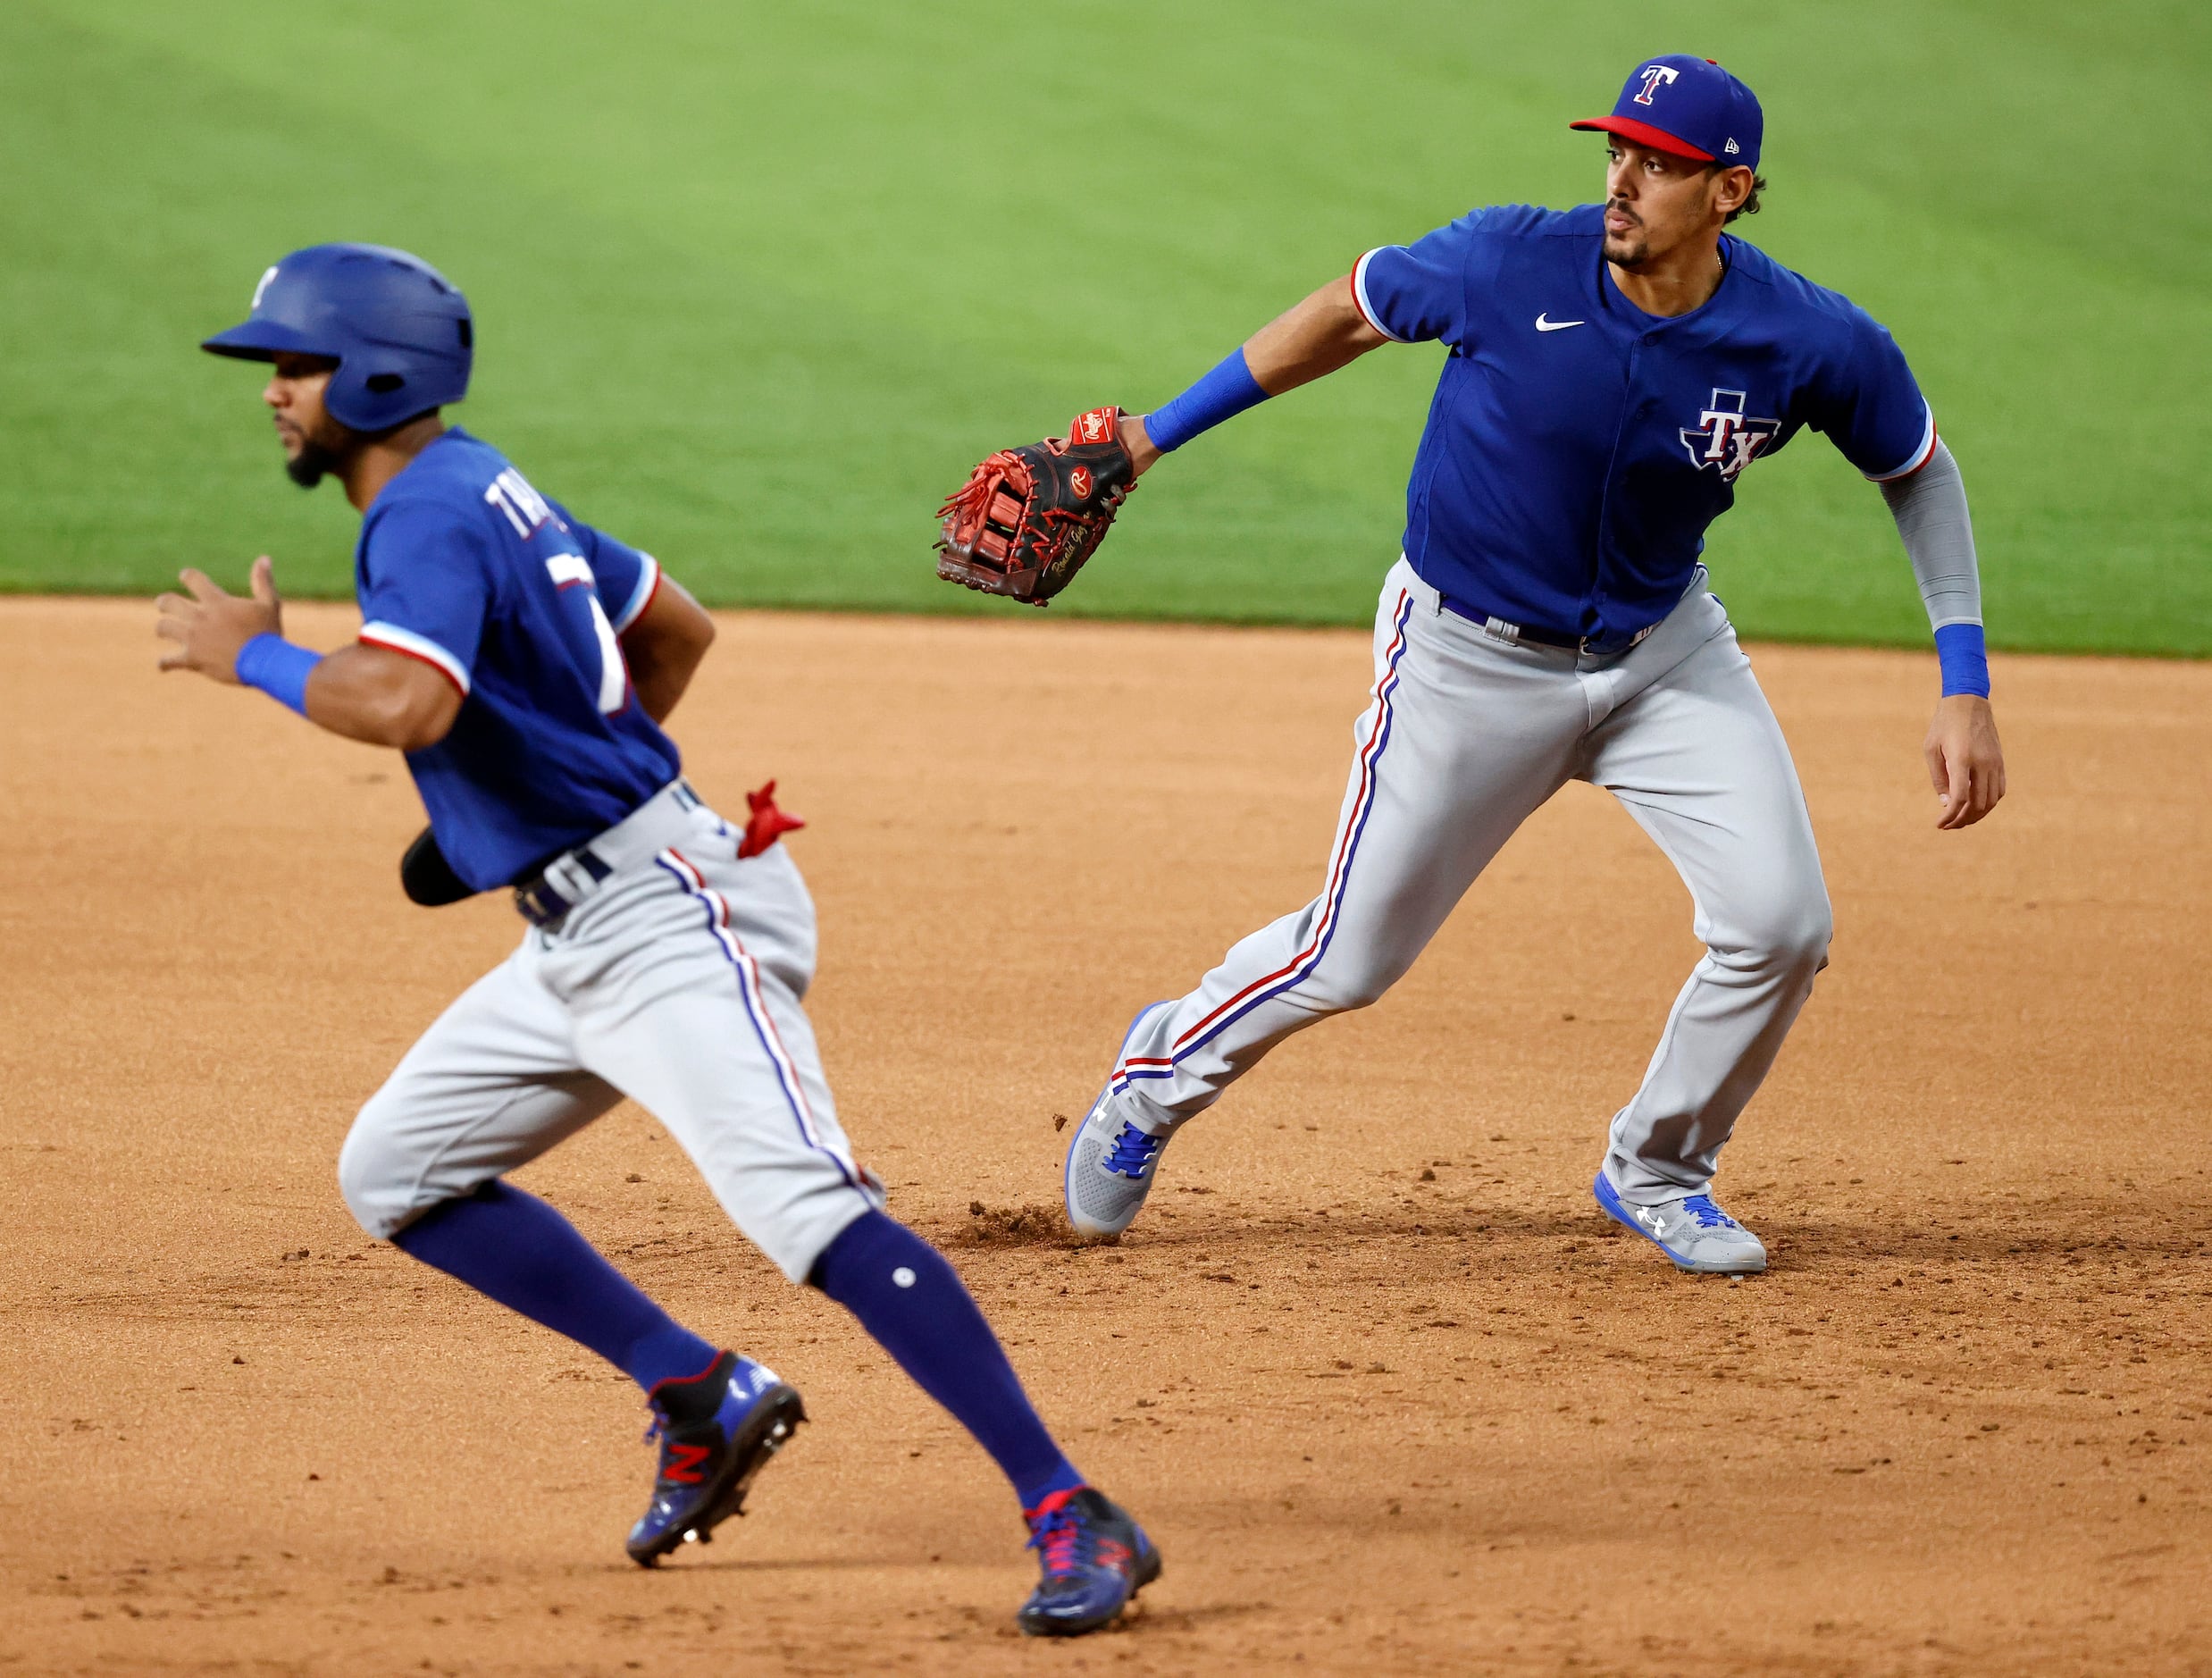 Texas Rangers first baseman Ronald Guzman (right) breaks for the base on an infield hit as...